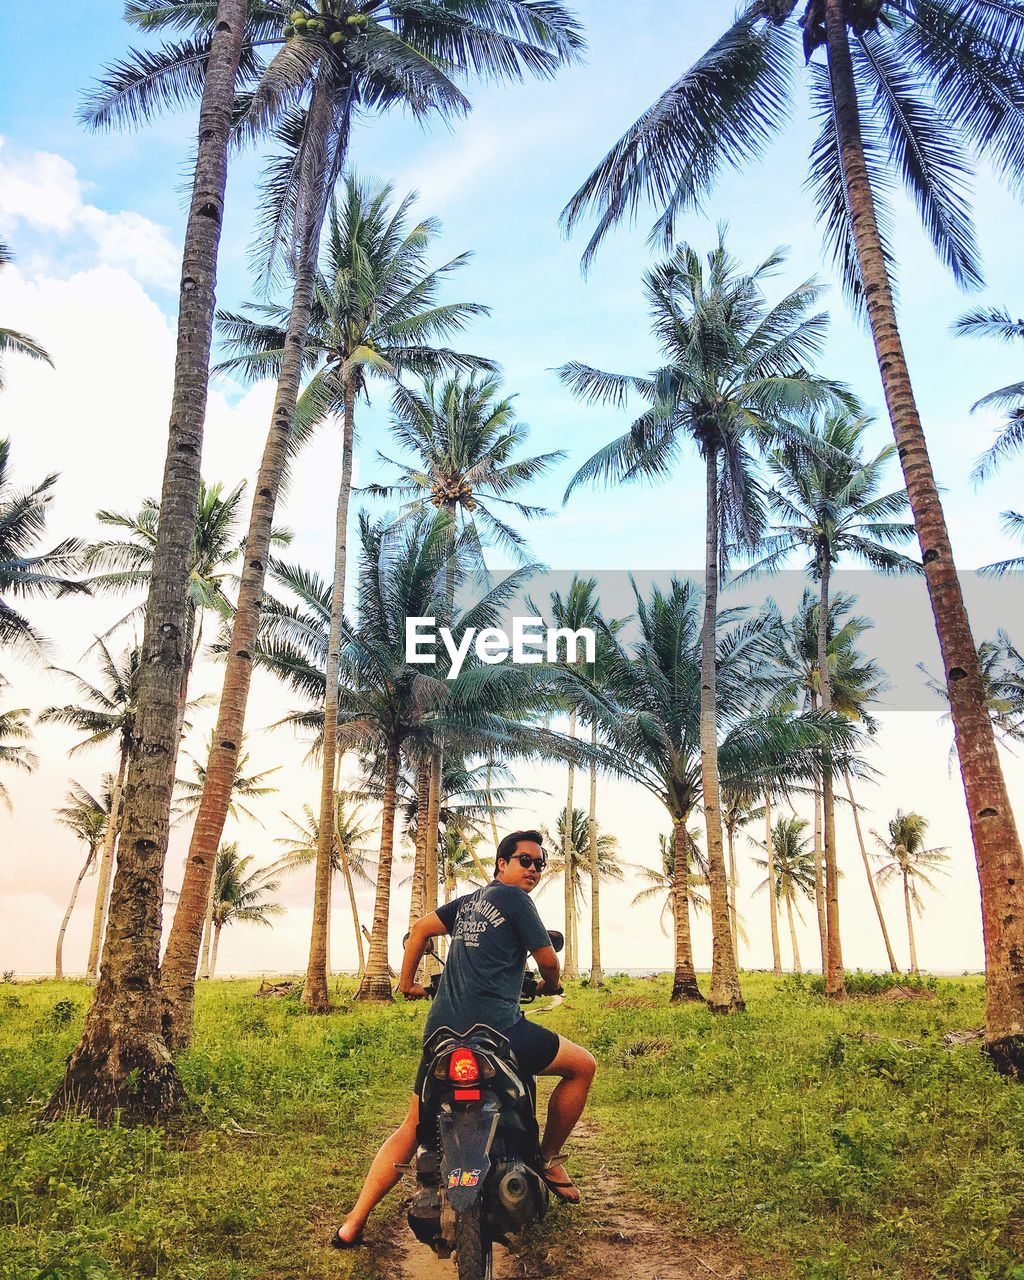 Man riding motorcycle on palm tree against sky